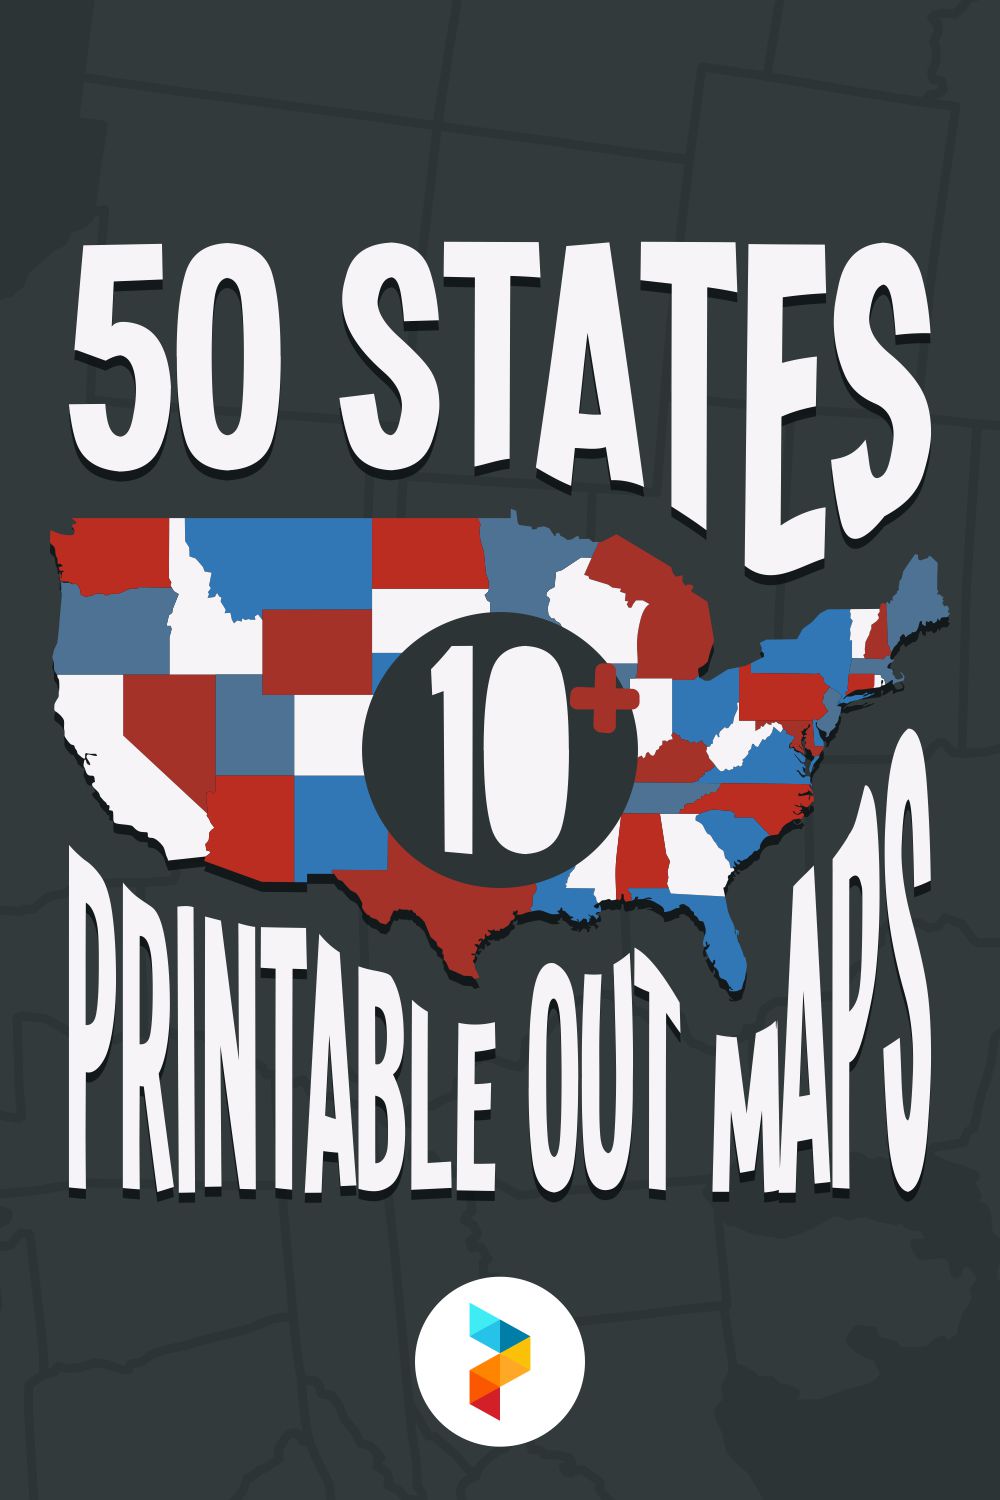 50 States Printable Out Maps